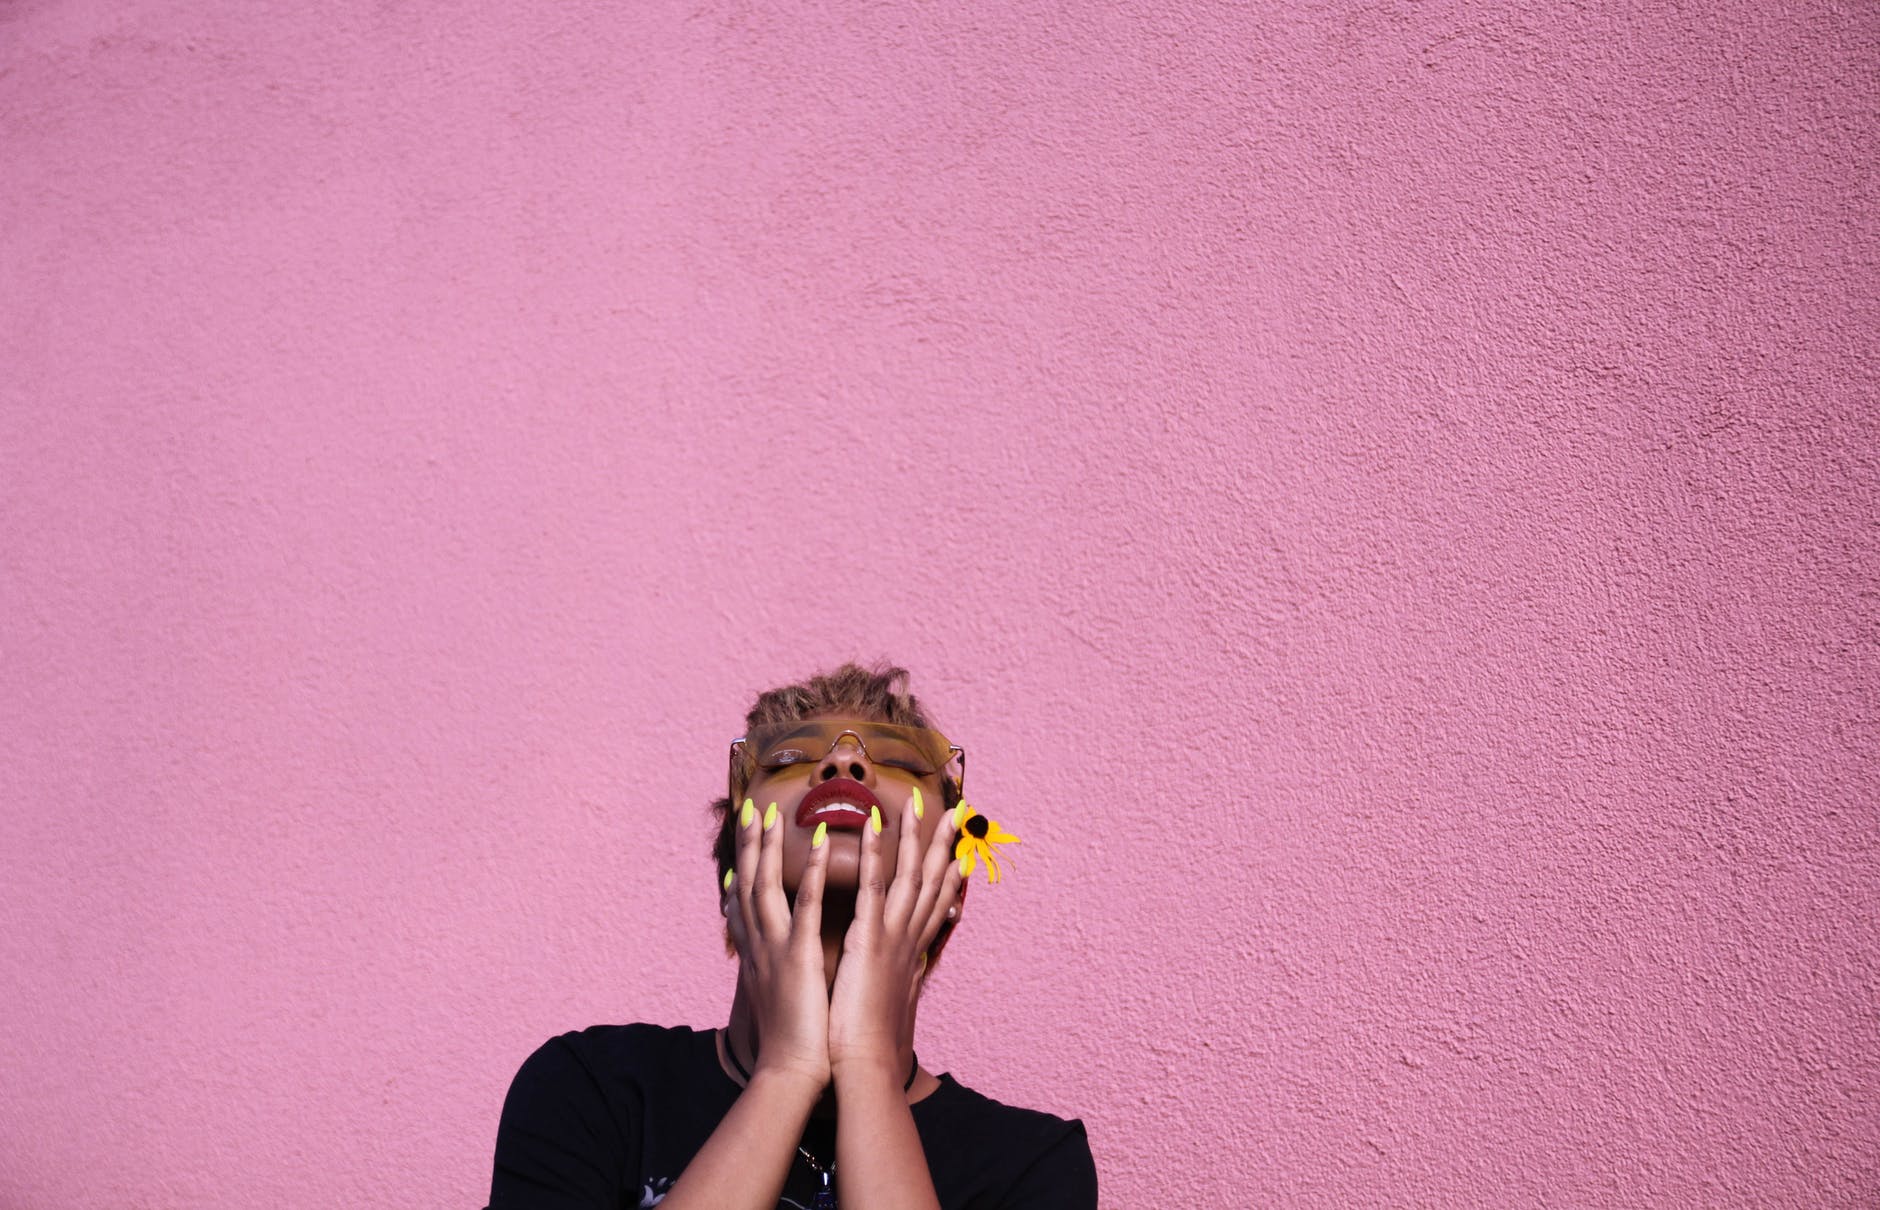 Pink background, a woman with short hair embraces her face. She has long, yellow nails and a sunflower.